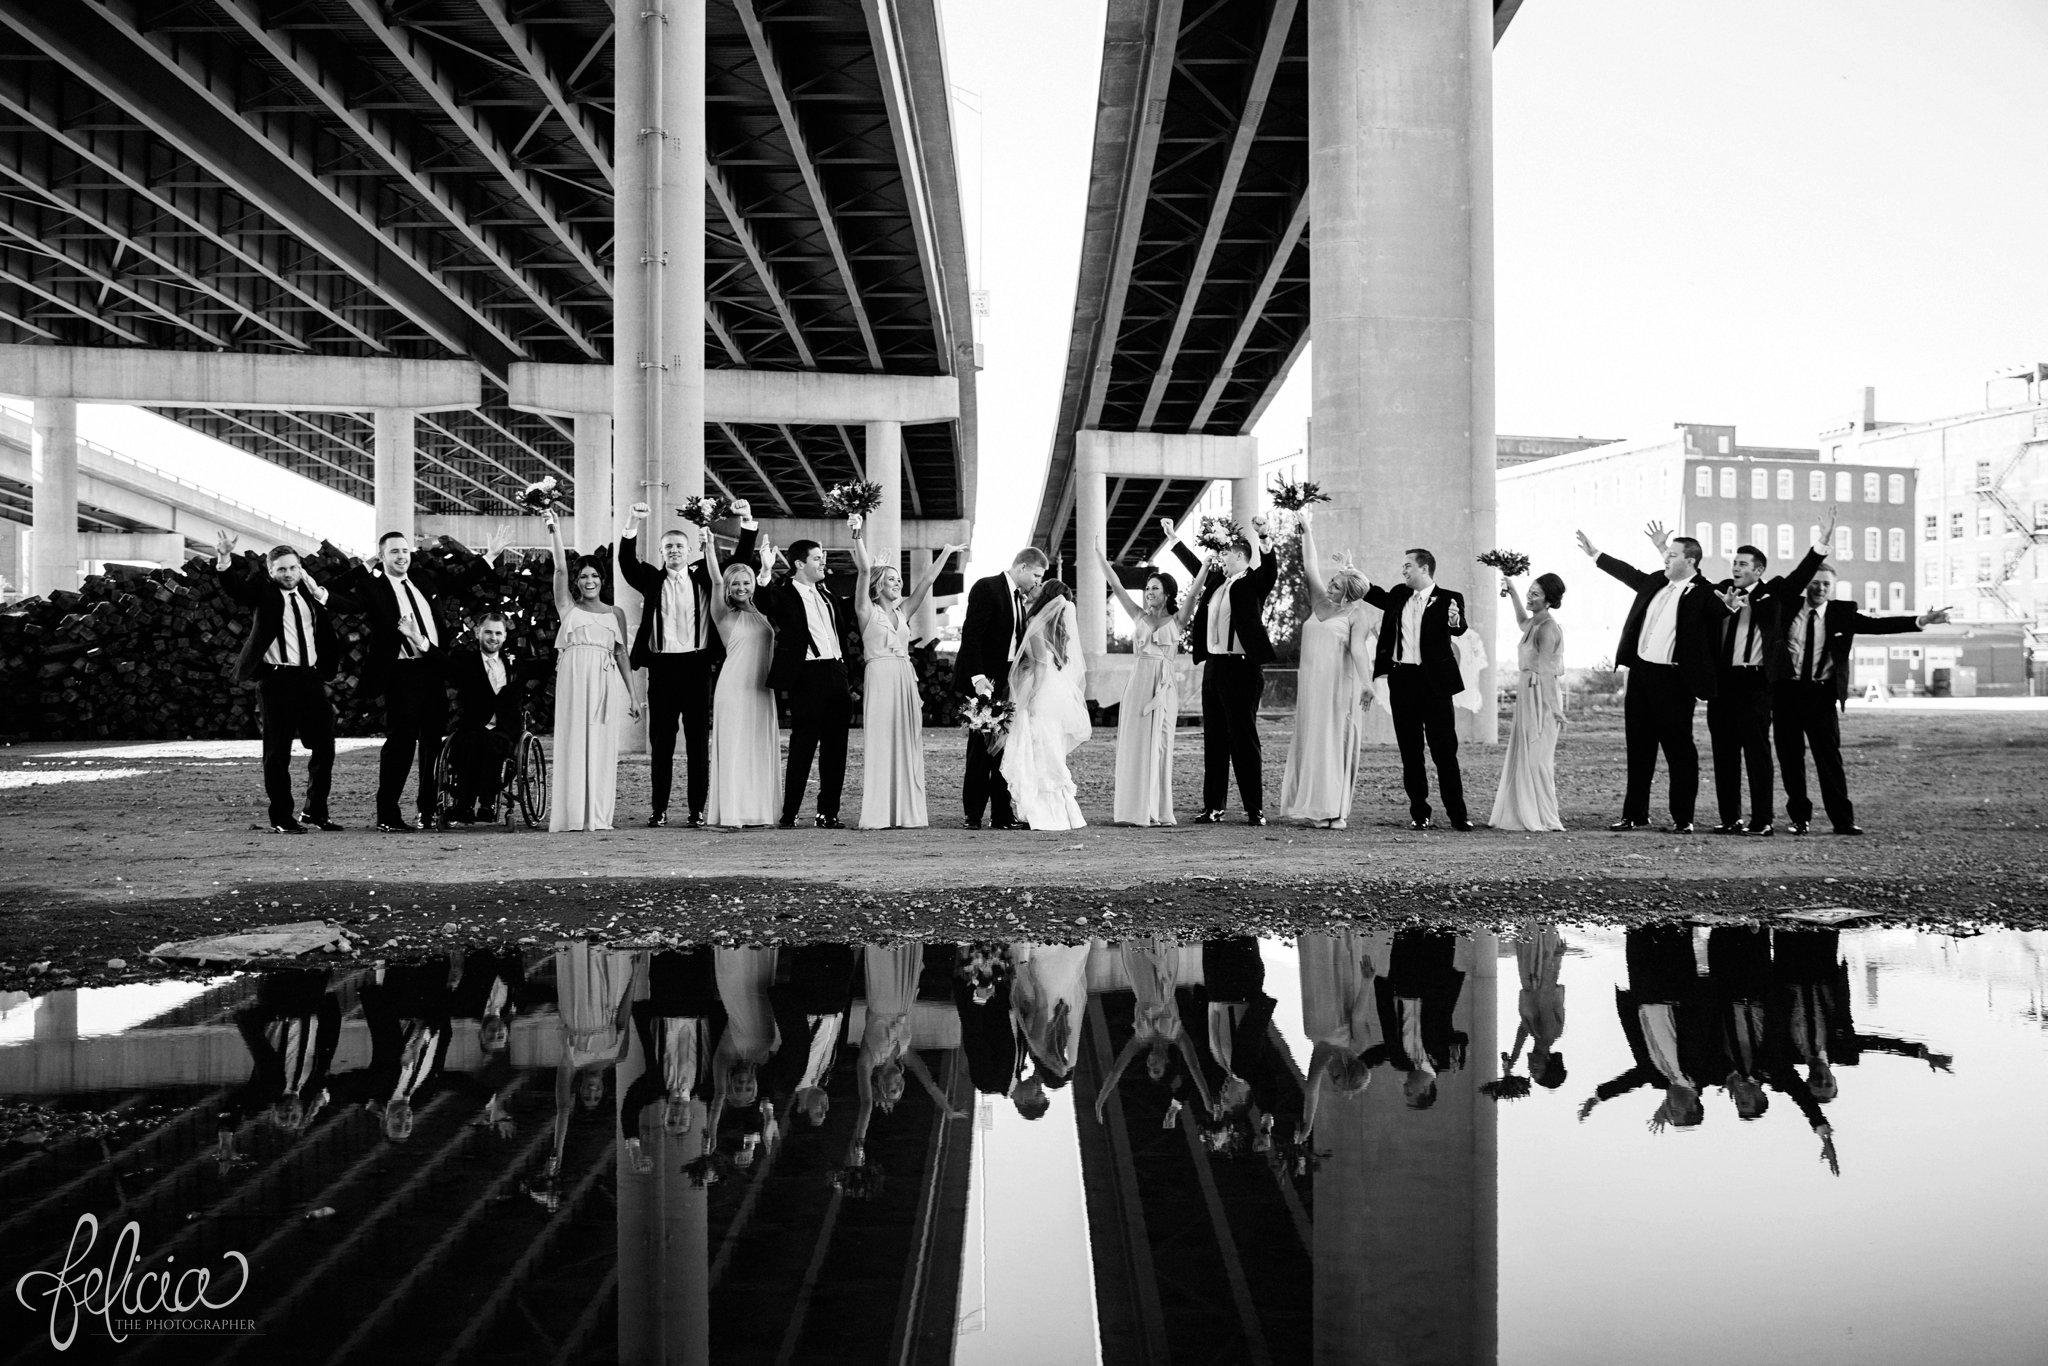 black and white | wedding | wedding photos | industrial | Rumely Event Space | wedding photography | images by feliciathephotographer.com | West Bottoms | industrial background | bridal party portraits | long bridesmaid dresses | beige | champagne | dramatic background | Bella Bridesmaids| reflection | candid | raised hands 